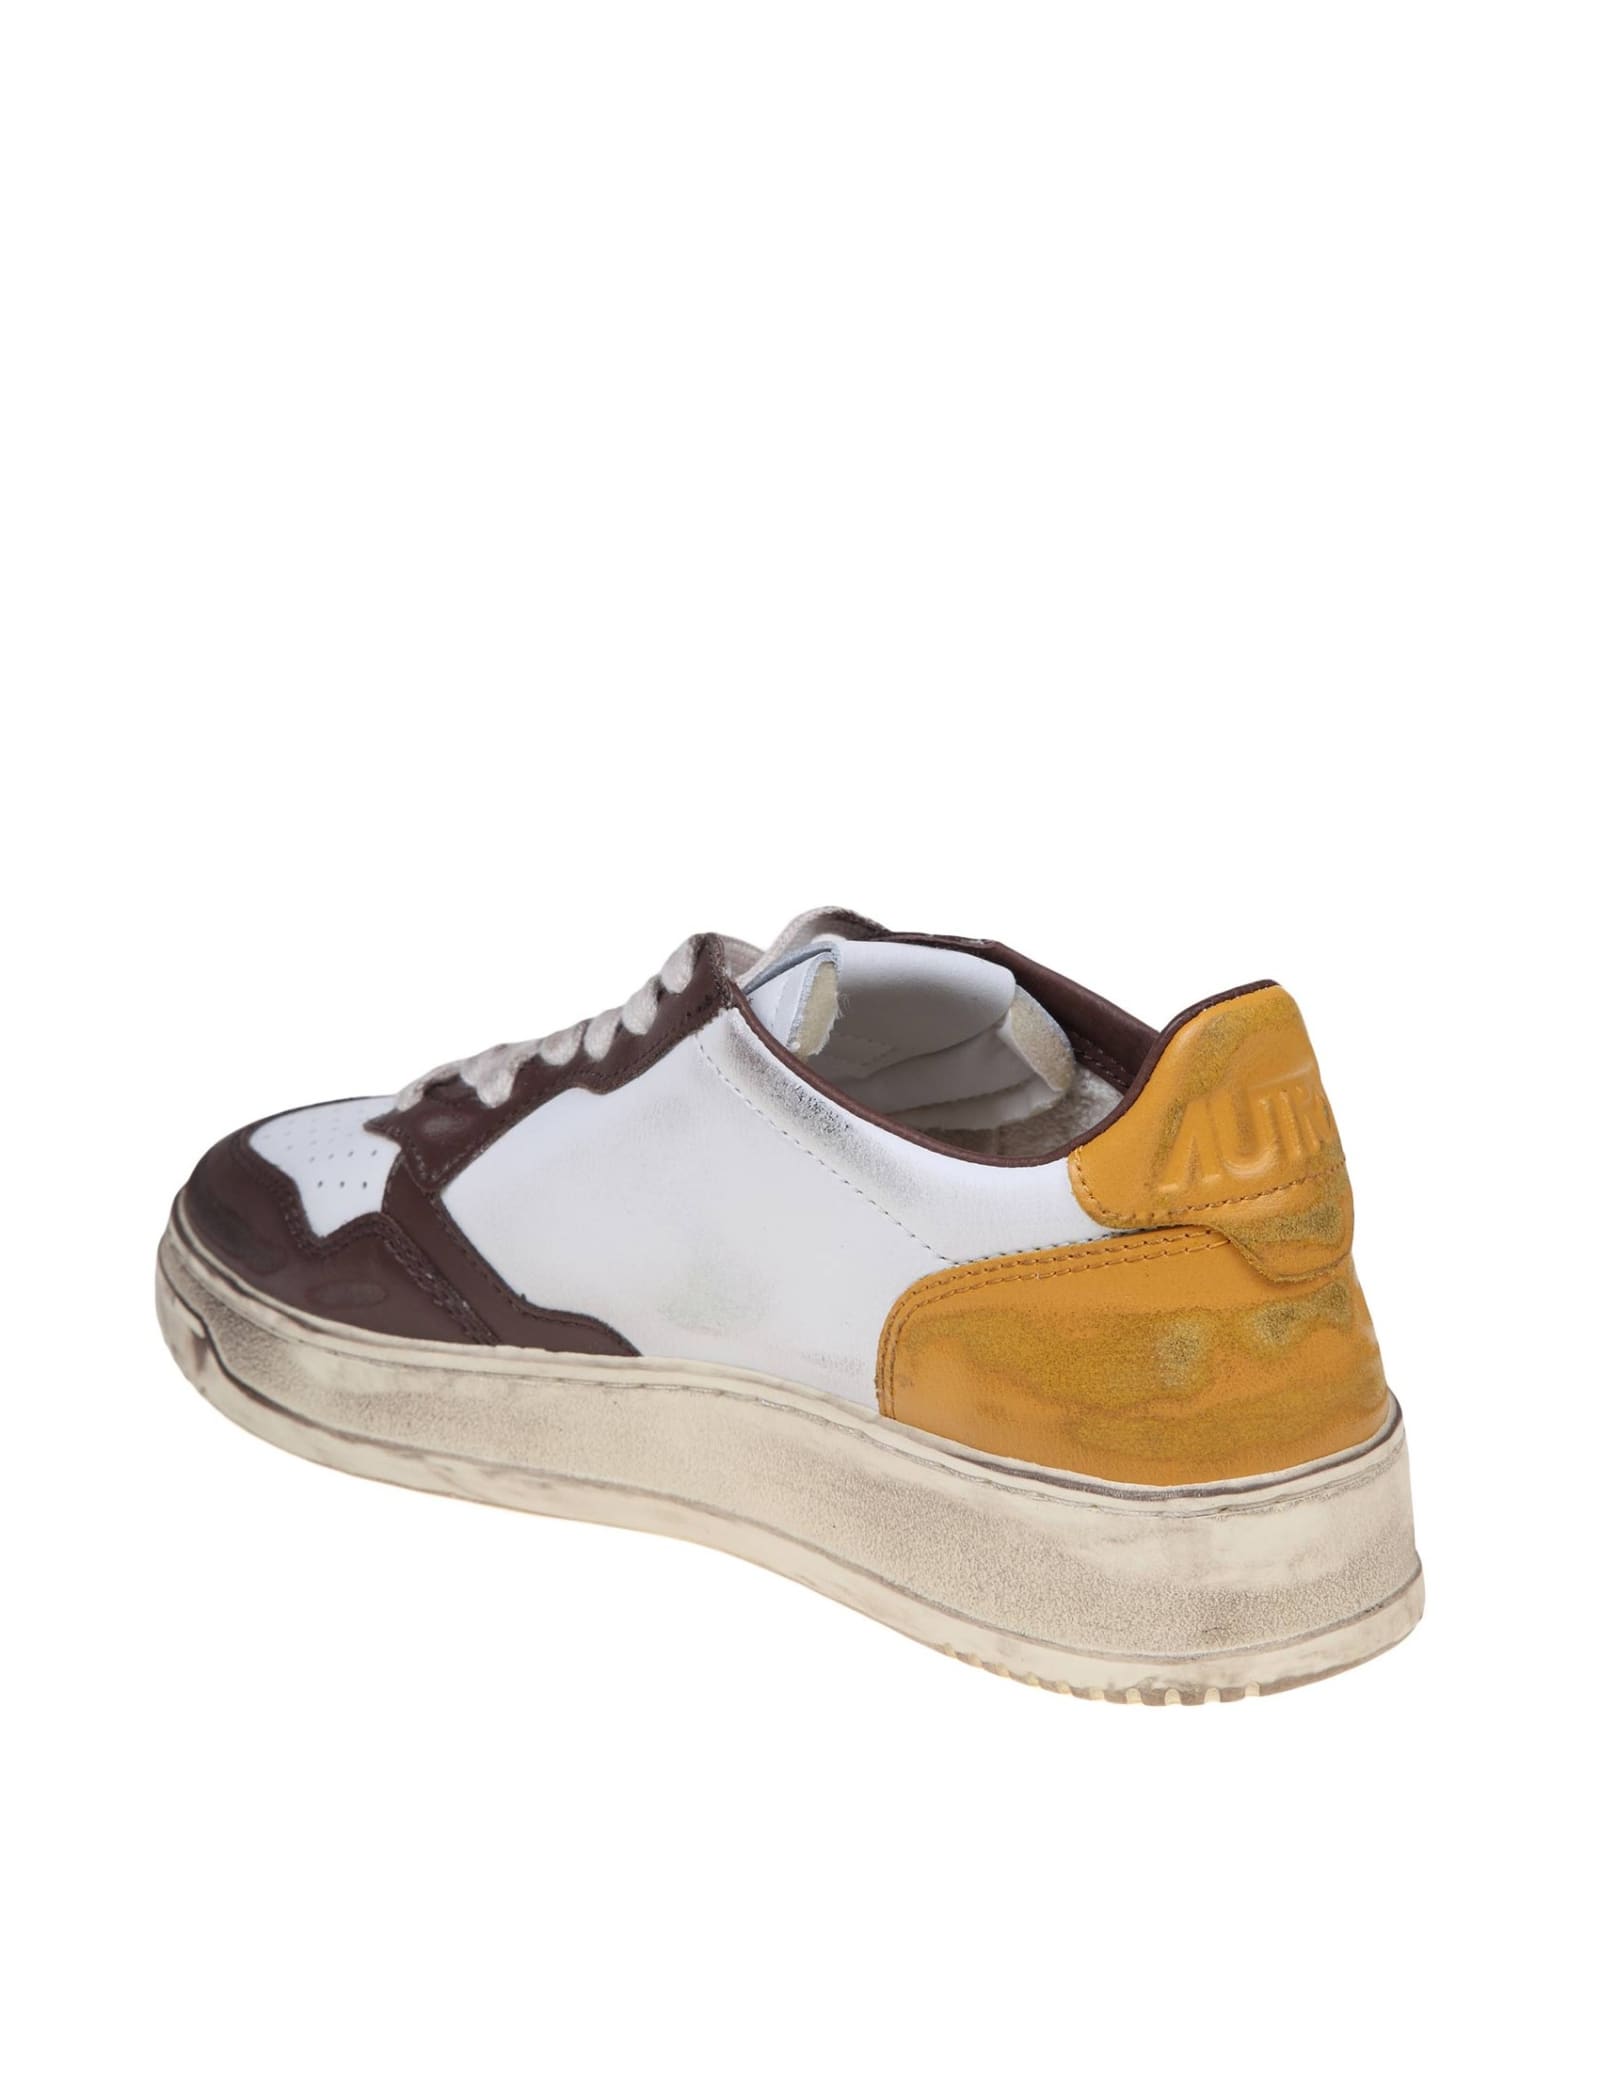 Shop Autry Sneakers In Super Vintage Leather In White/brown